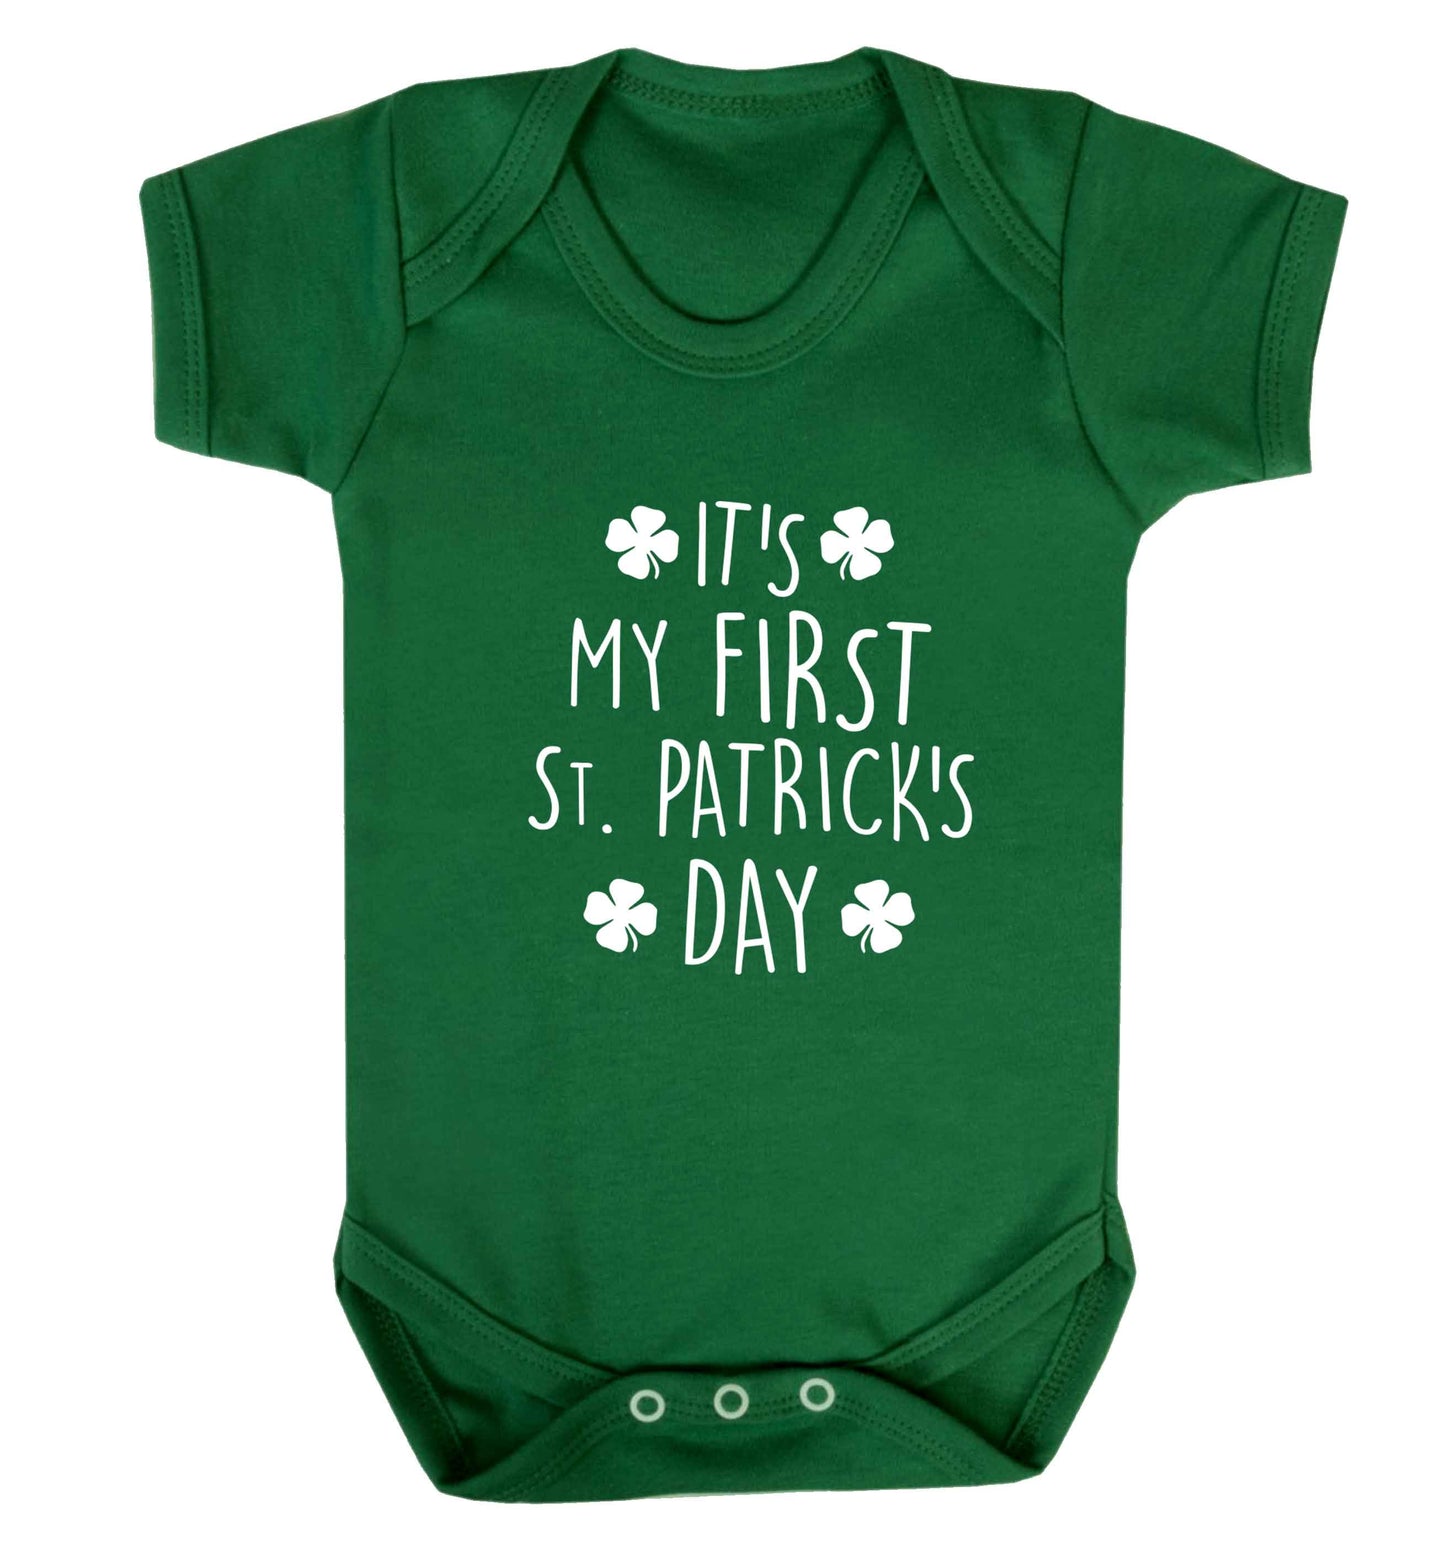 It's my first St.Patrick's day baby vest green 18-24 months